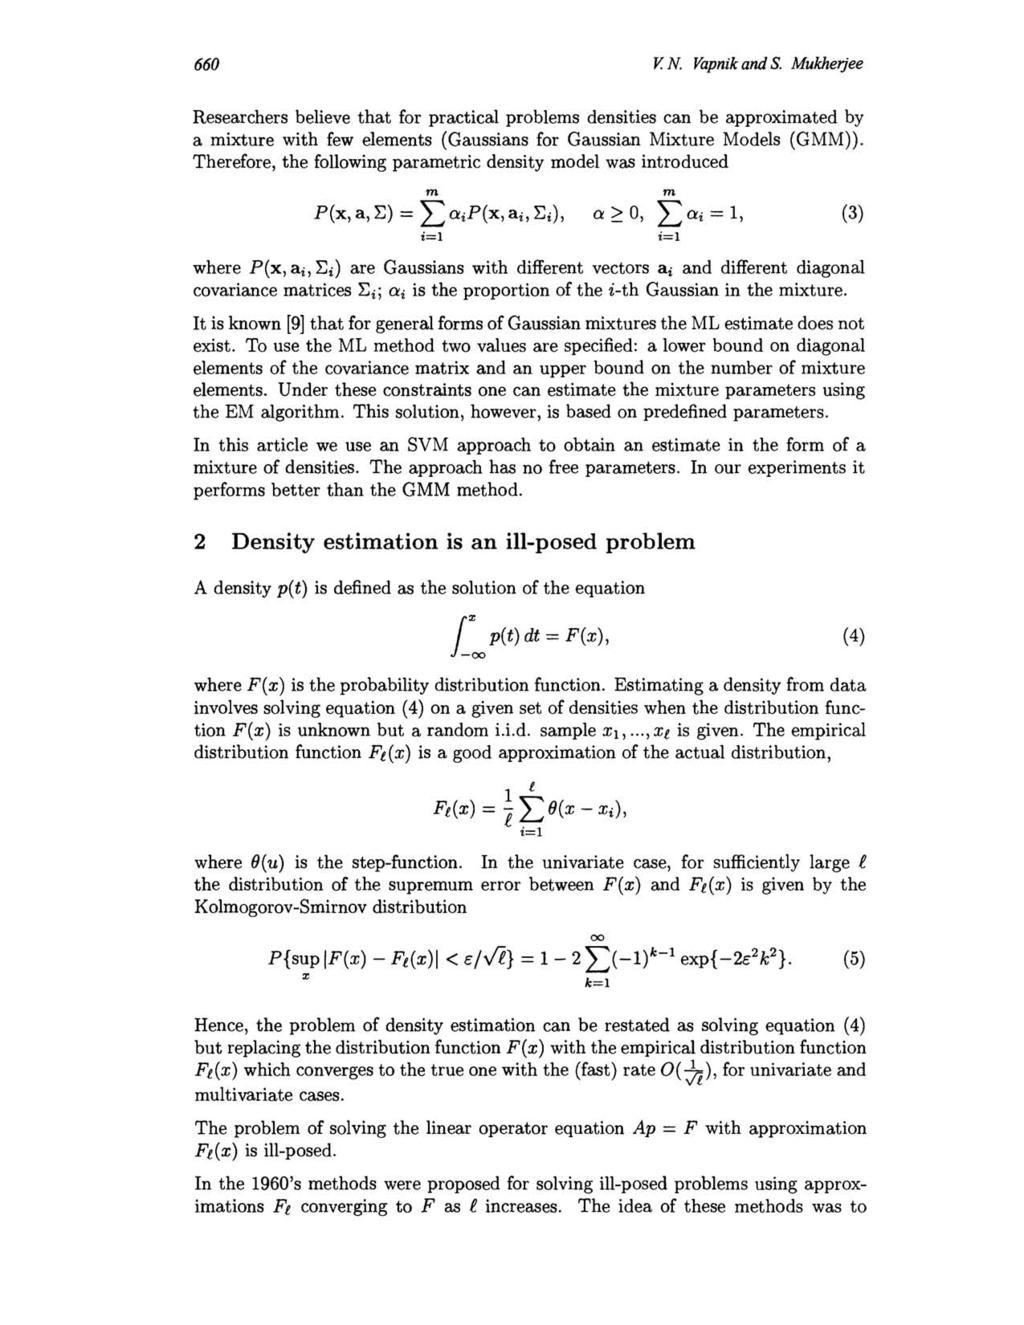 660 V. N. Vapnik and S. Mukherjee Researchers believe that for practical problems densities can be approximated by a mixture with few elements (Gaussians for Gaussian Mixture Models (GMM)).